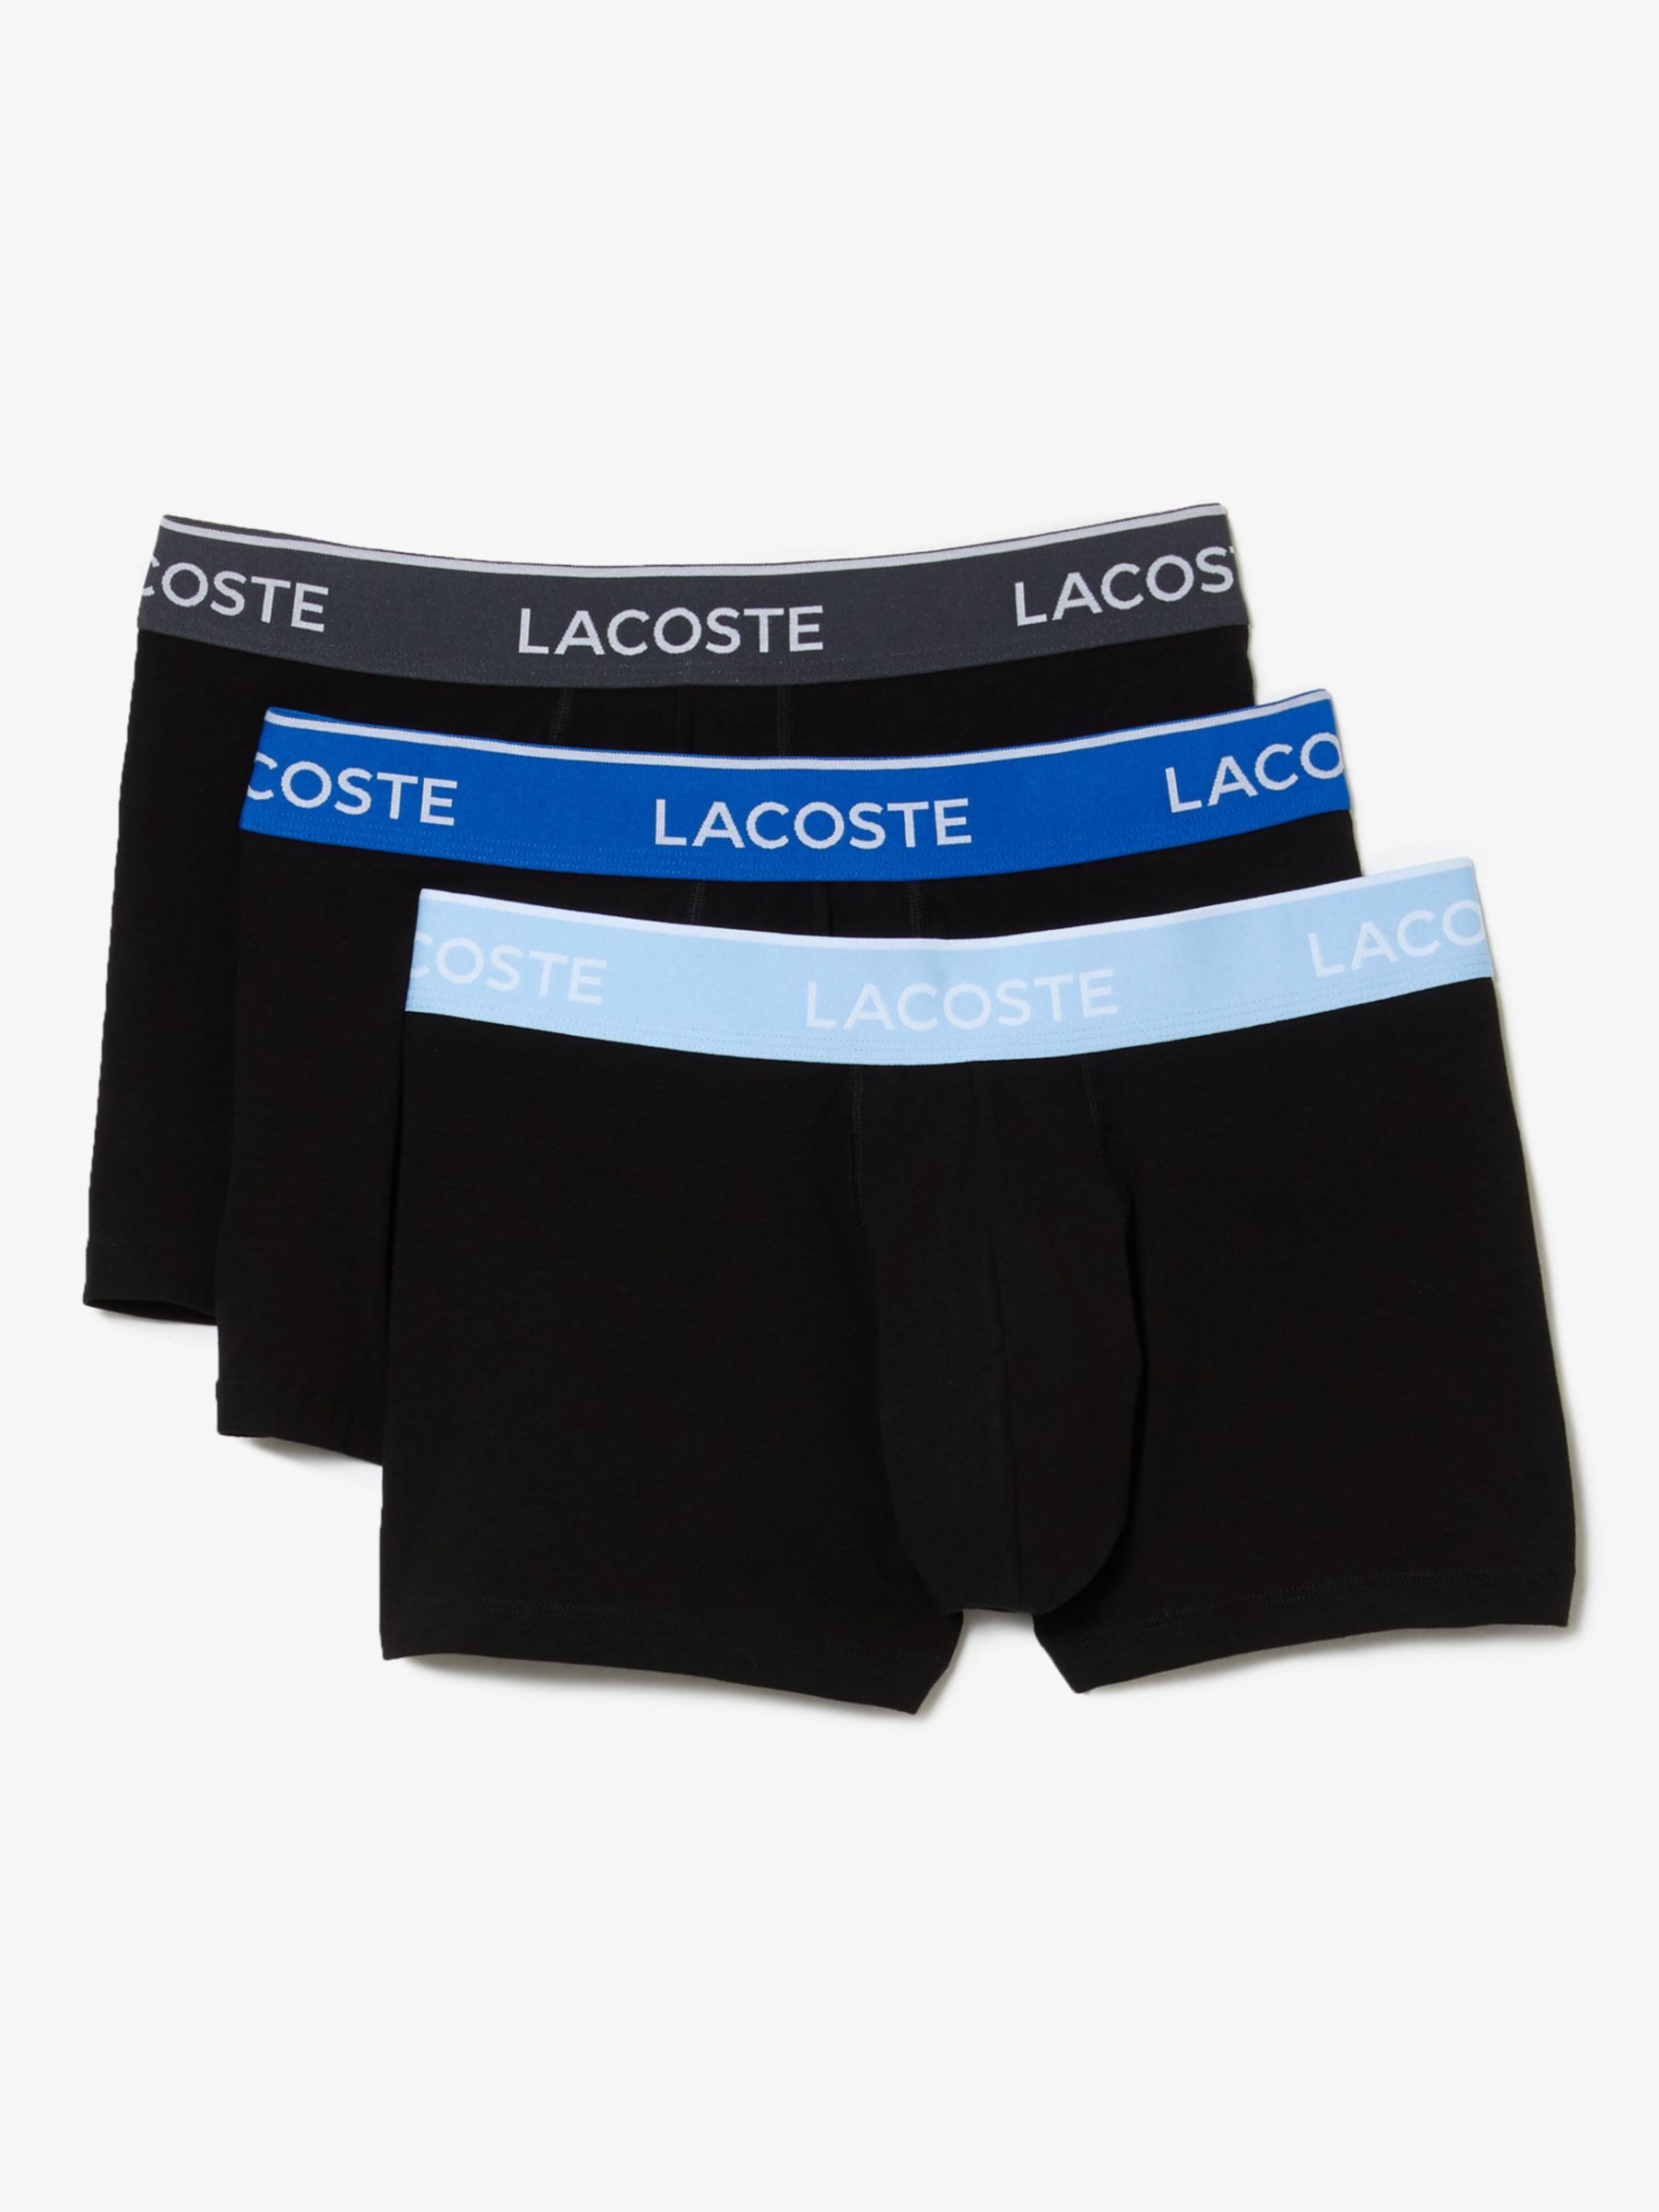 Lacoste Contrast Waistband Trunks, Pack of 3, Blue Multi, S